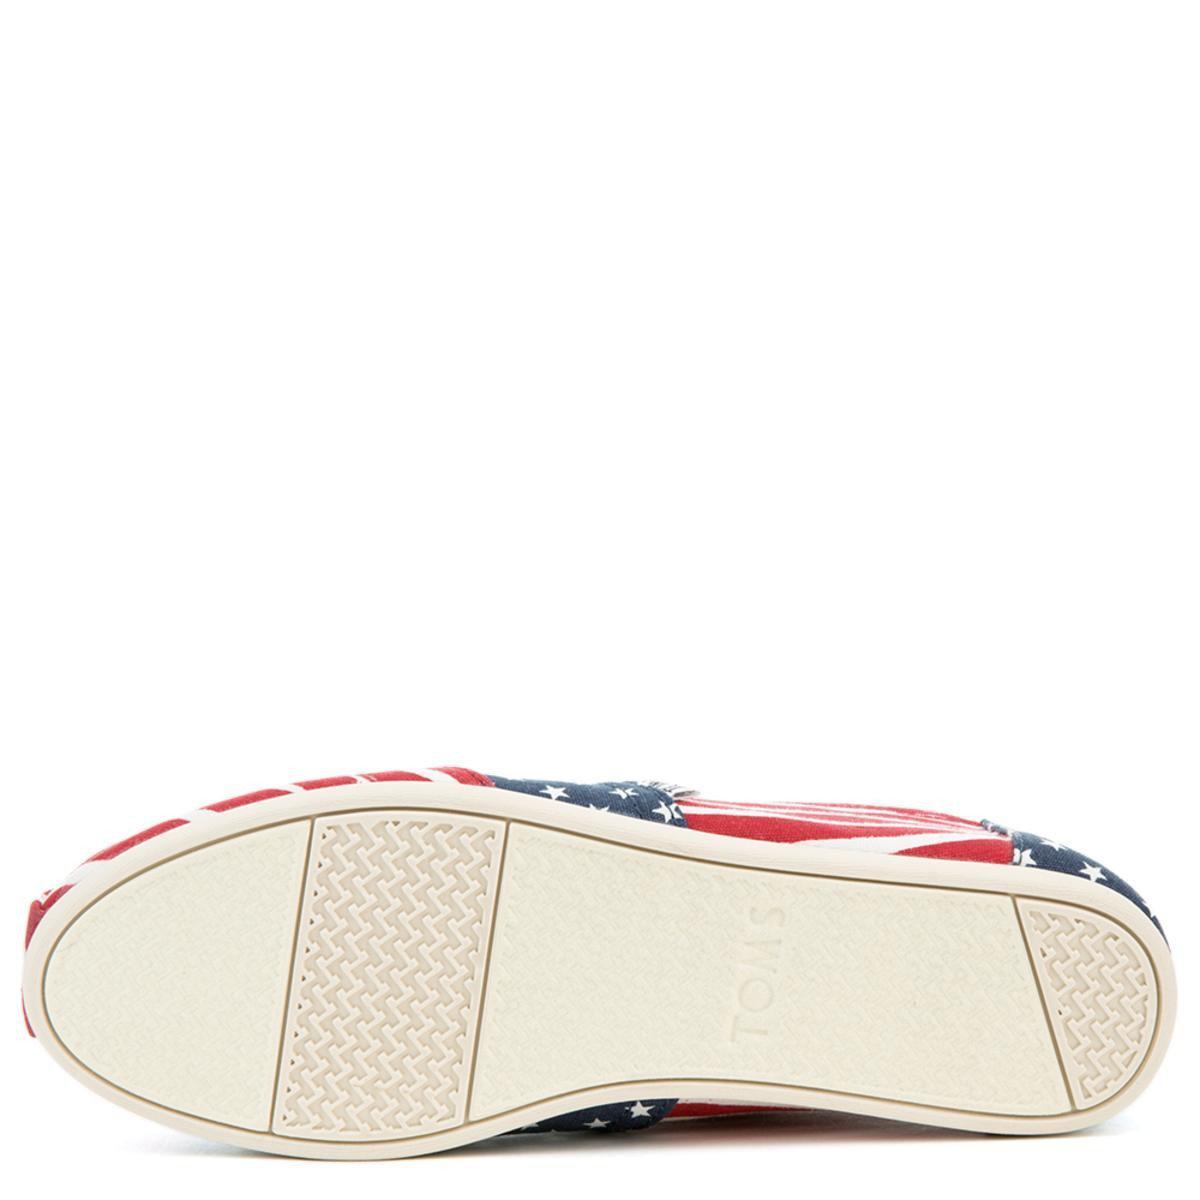 toms red white and blue shoes